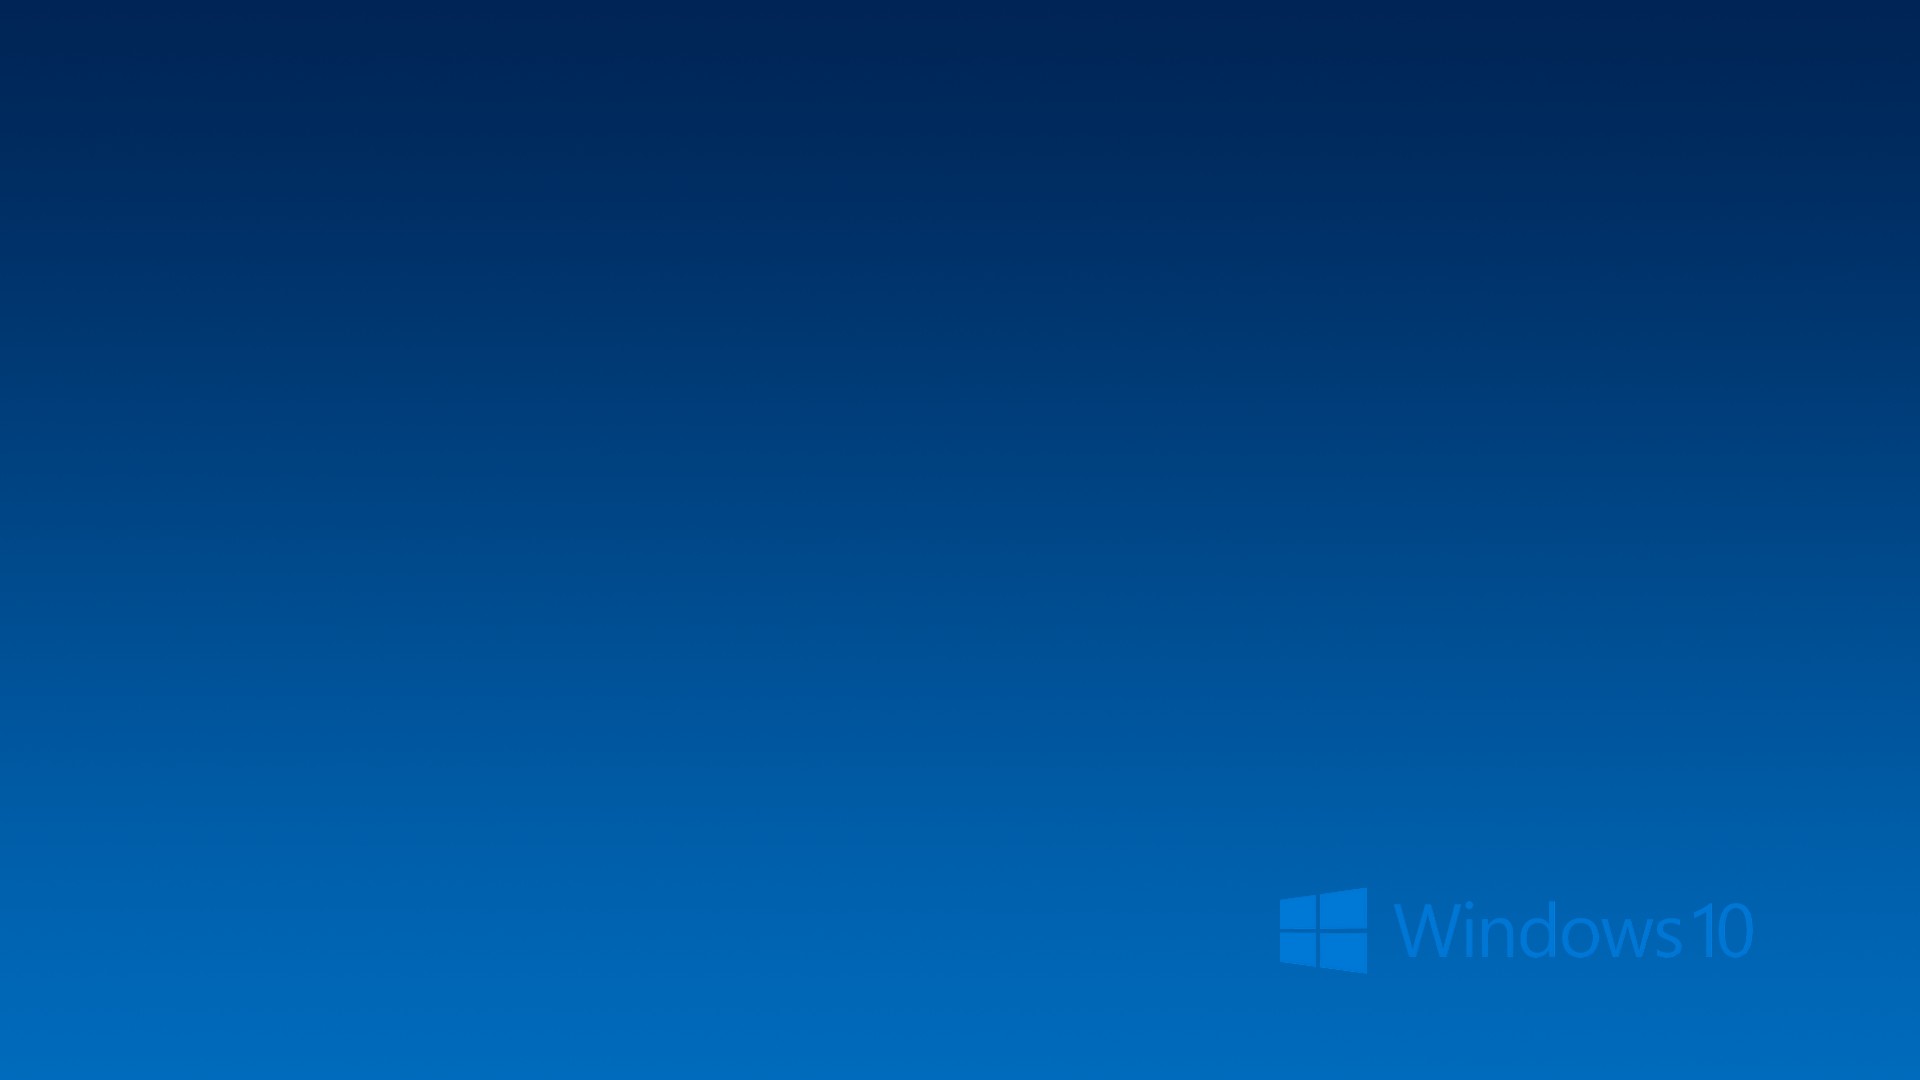 HD Wallpaper Windows 10 With high-resolution 1920X1080 pixel. You can use this wallpaper for your Desktop Computer Backgrounds, Mac Wallpapers, Android Lock screen or iPhone Screensavers and another smartphone device